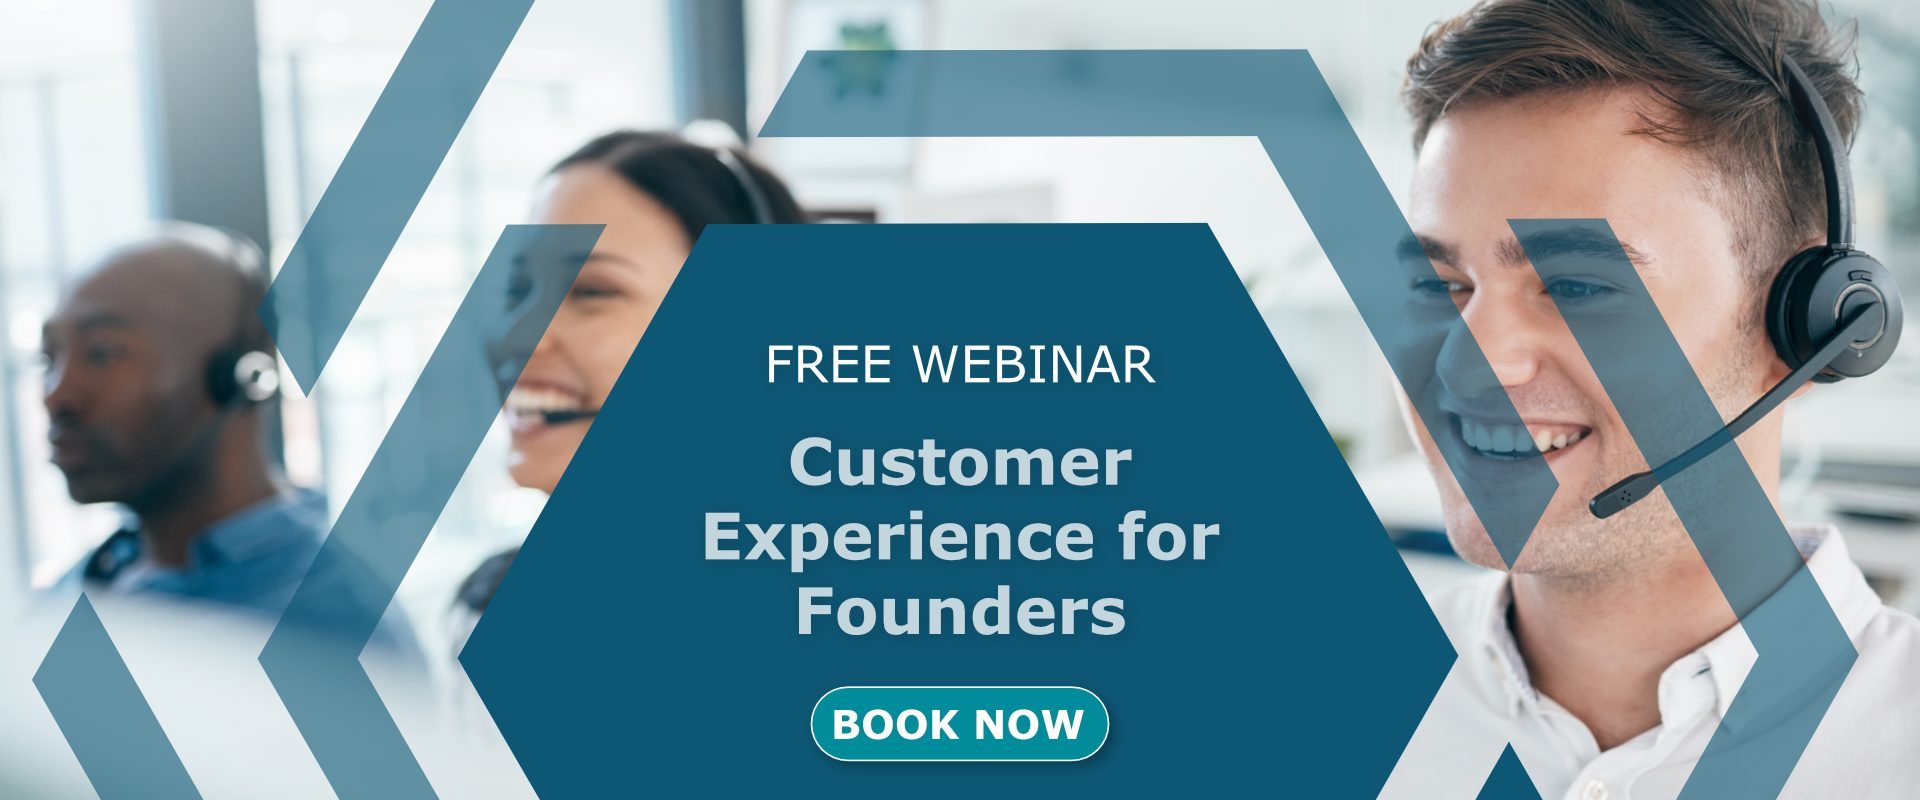 Customer Experience for Founders